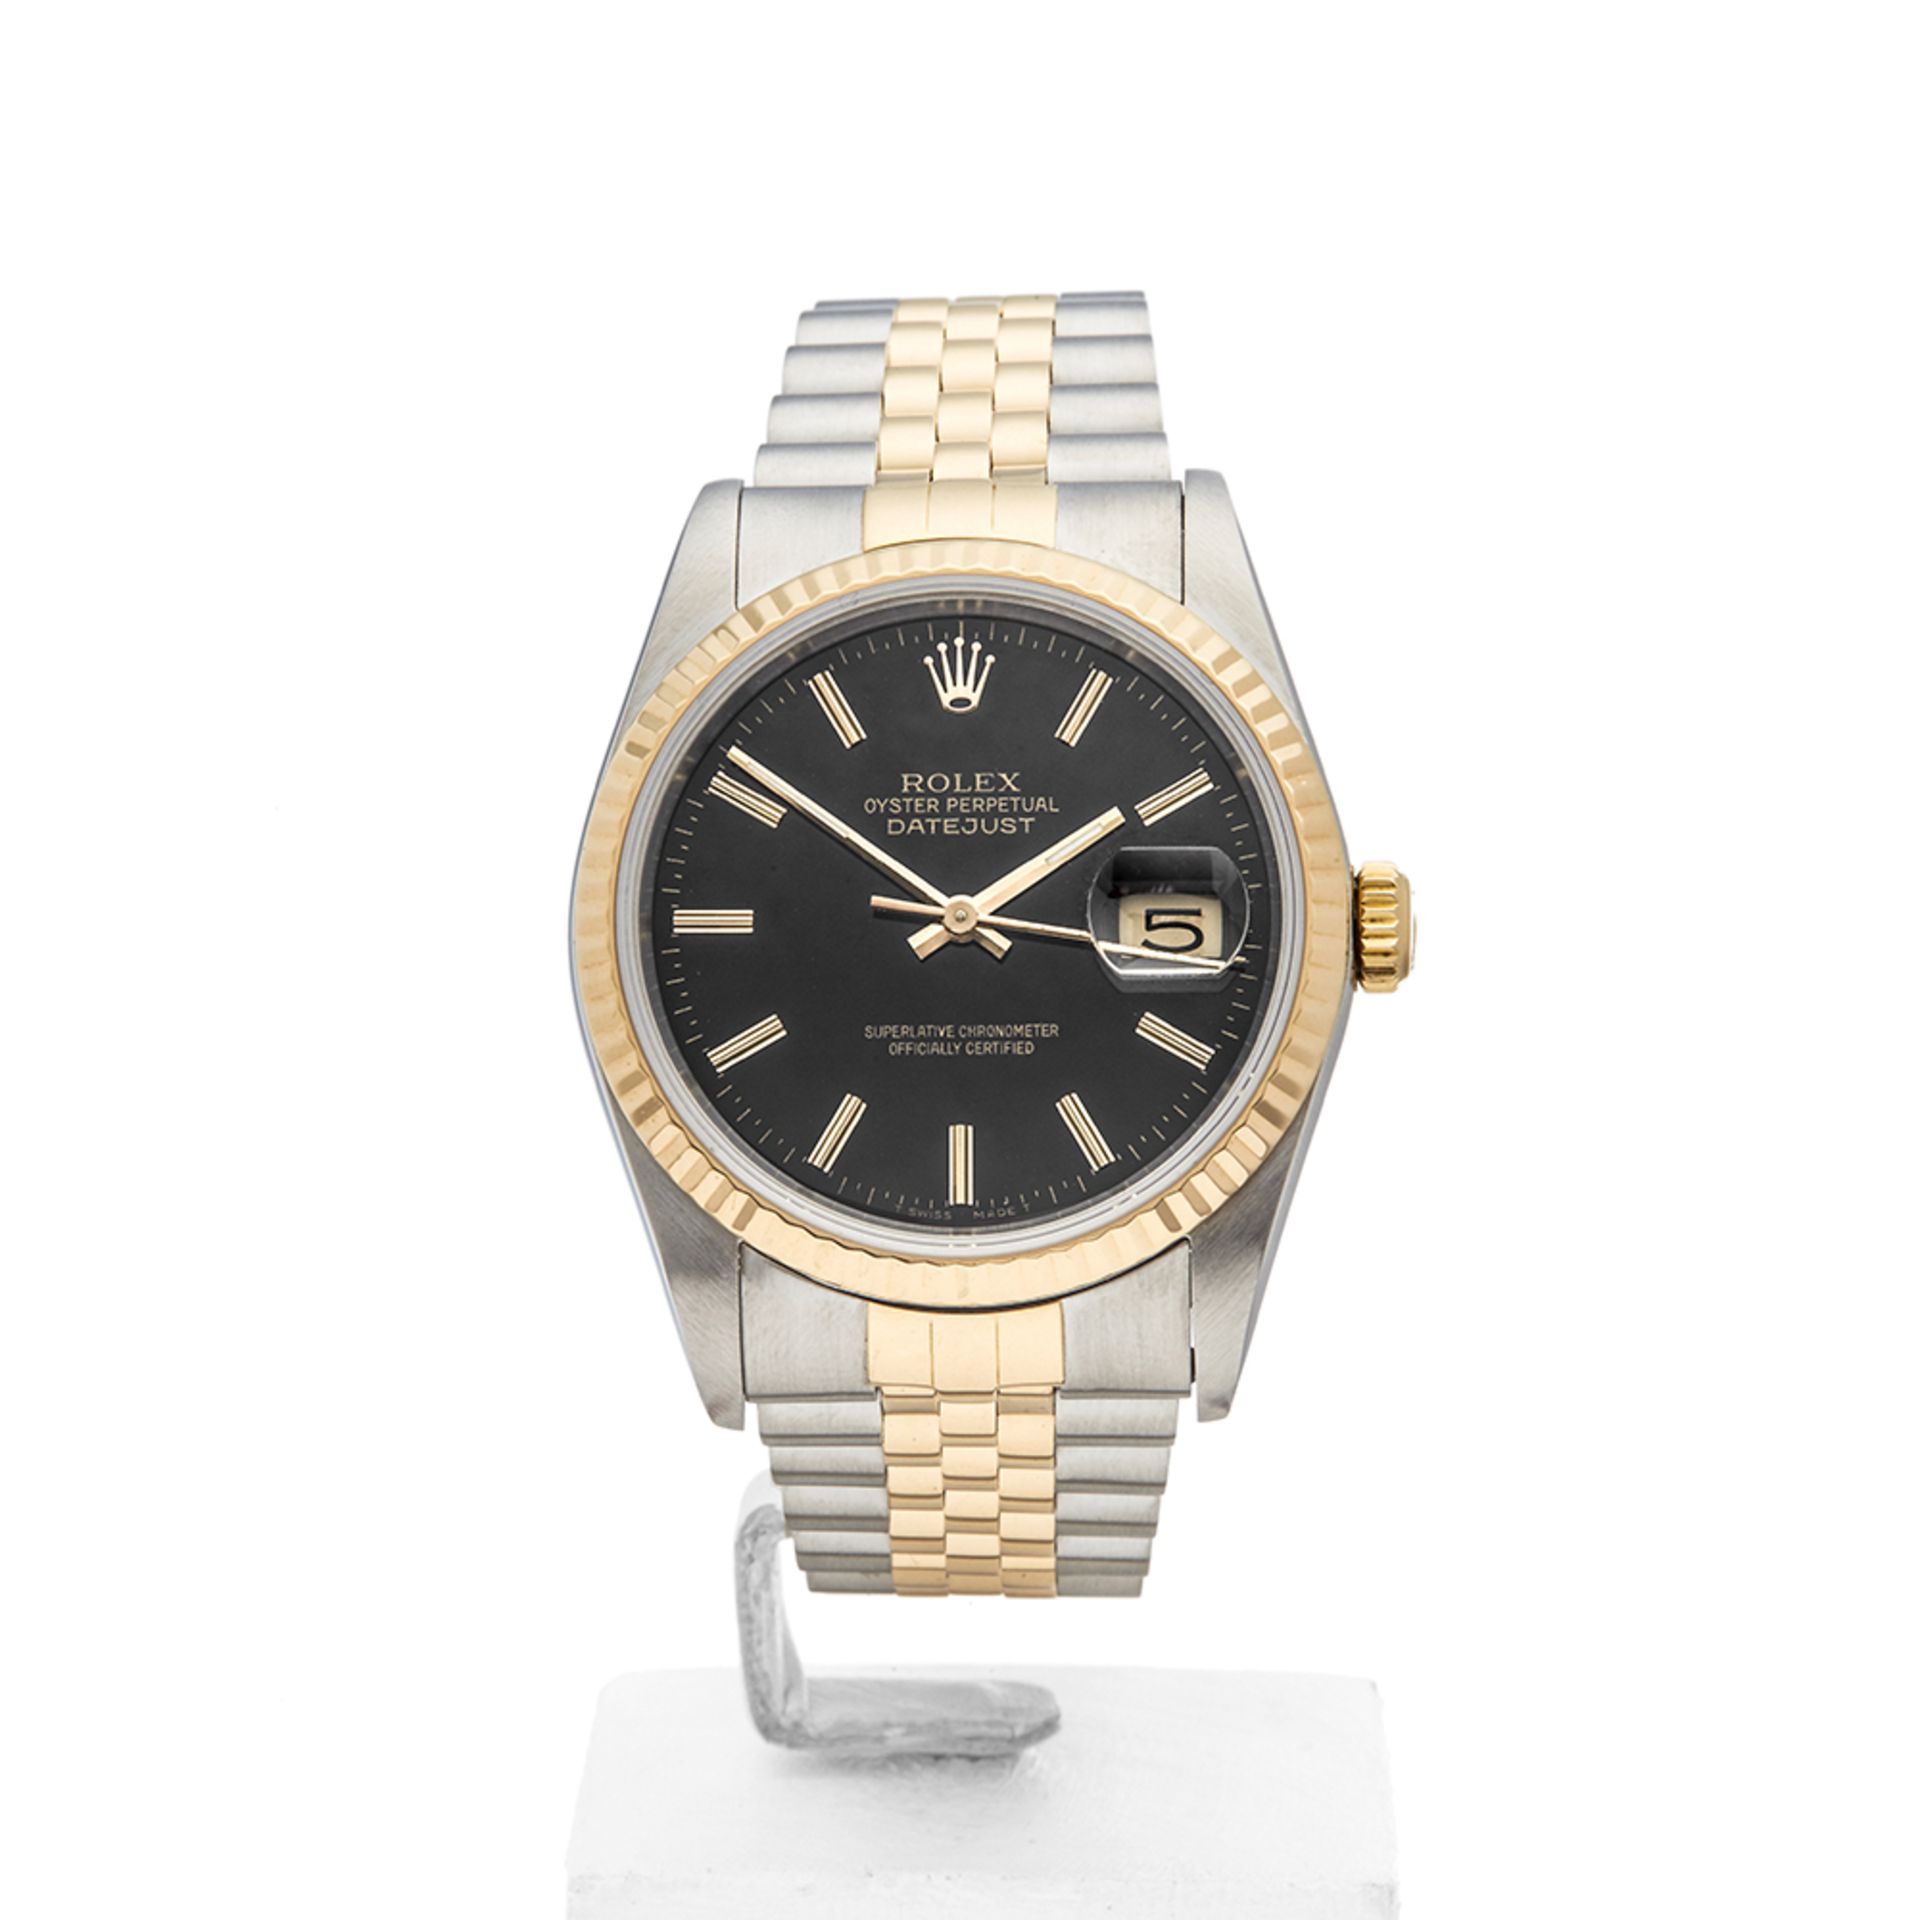 Rolex Datejust Stainless Steel & 18k Yellow Gold - 16233 - Image 2 of 9